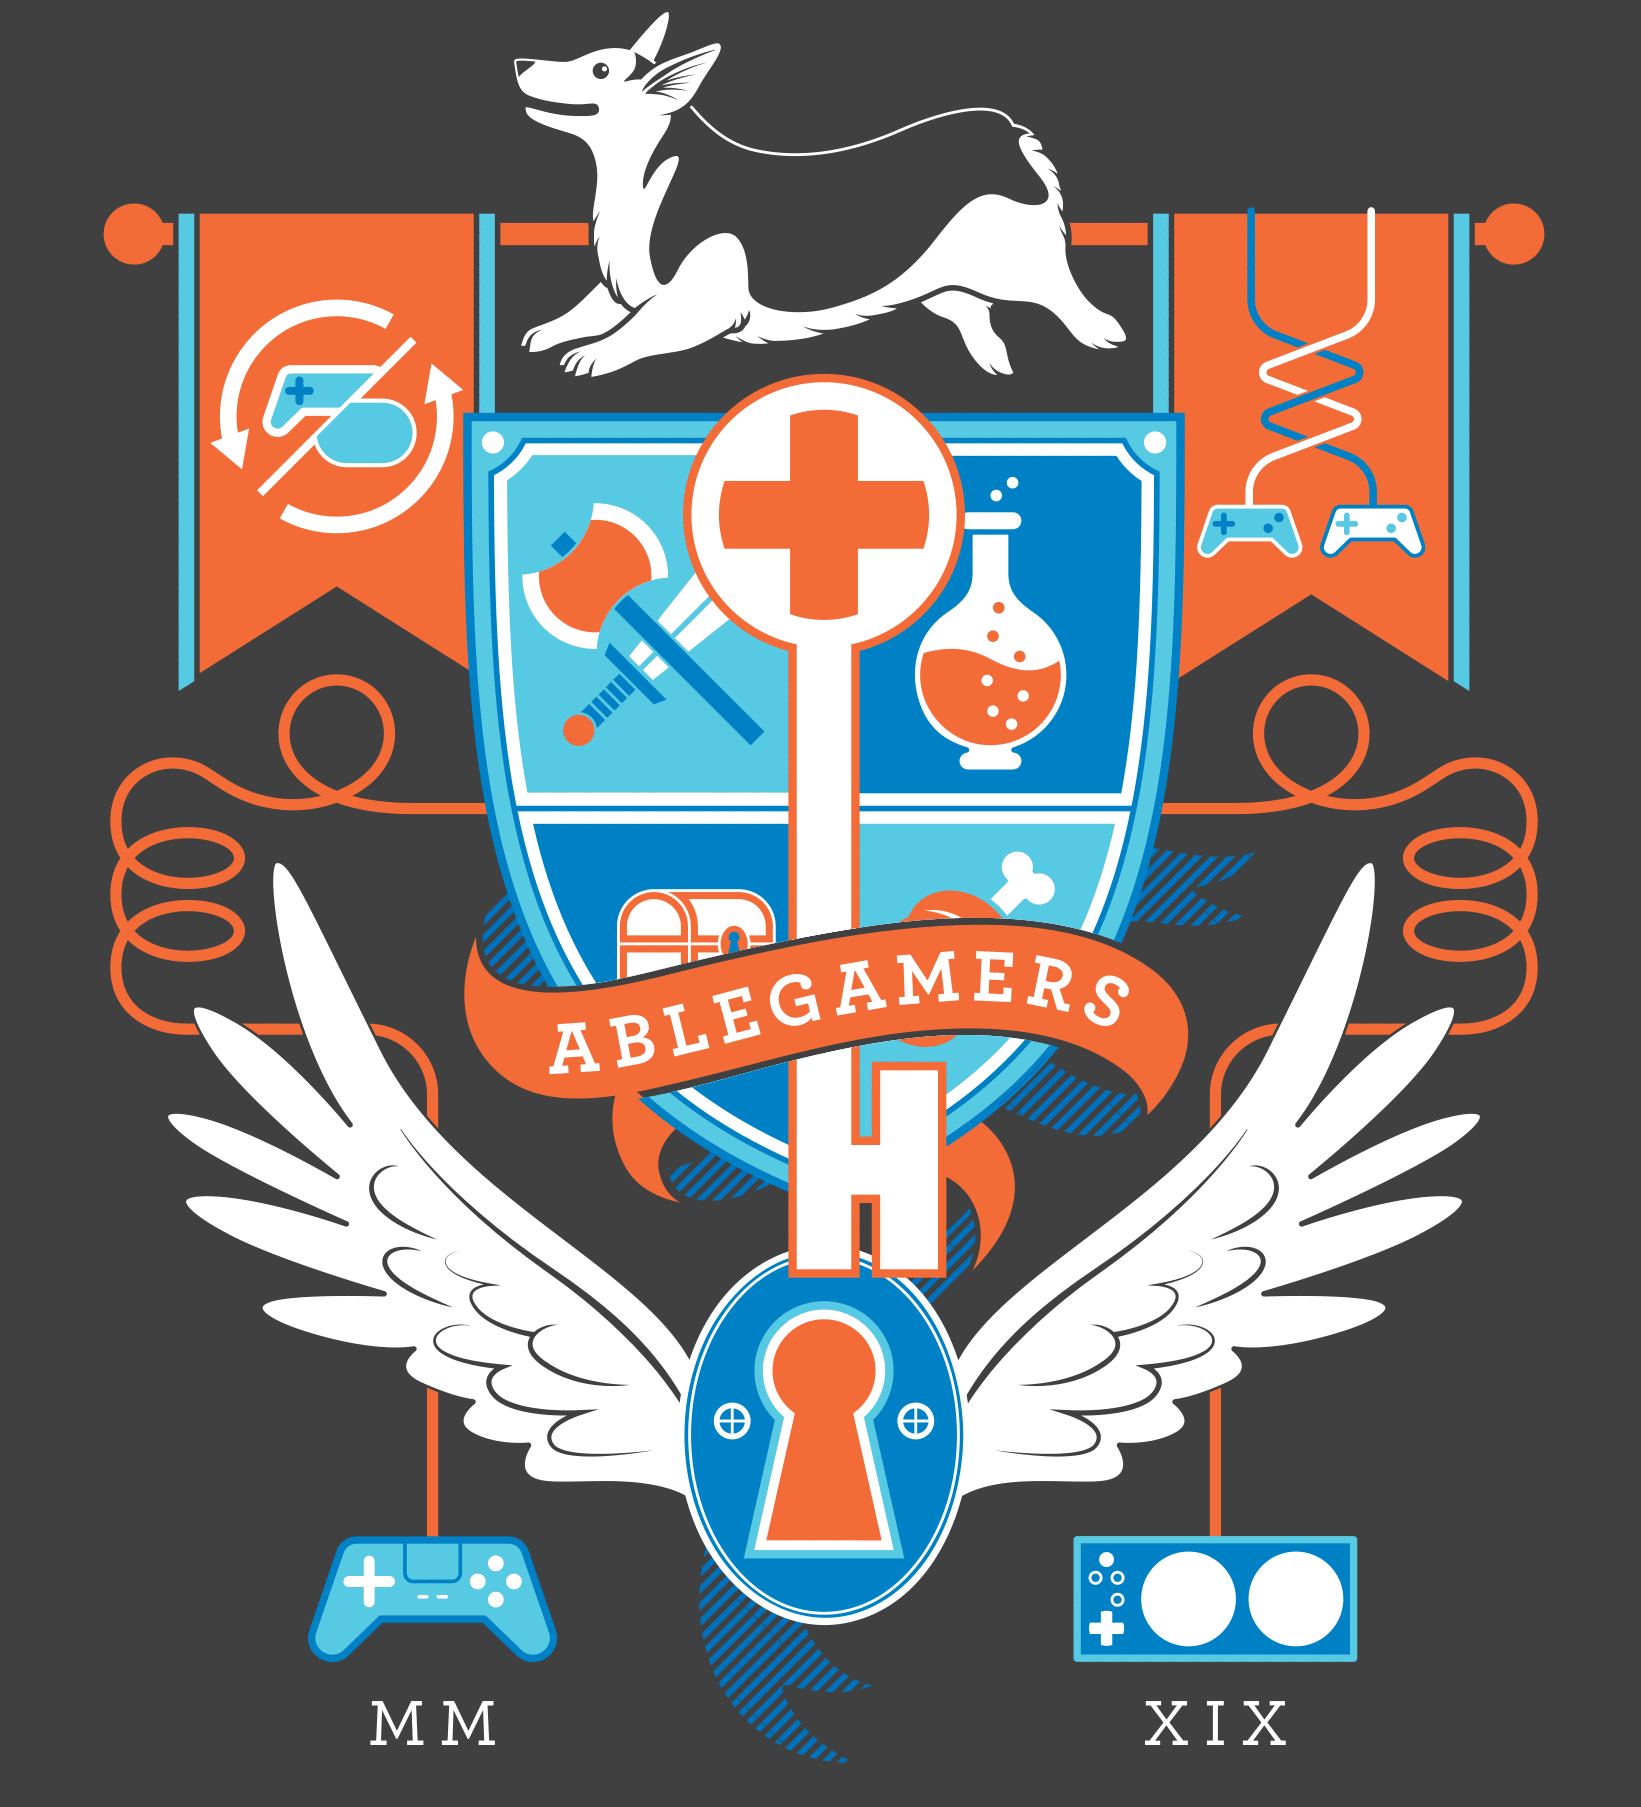 A crest like logo showing off various gaming items including a controller that looks like a PS4 controller and a controller that resembles the Xbox Adaptive Controller.